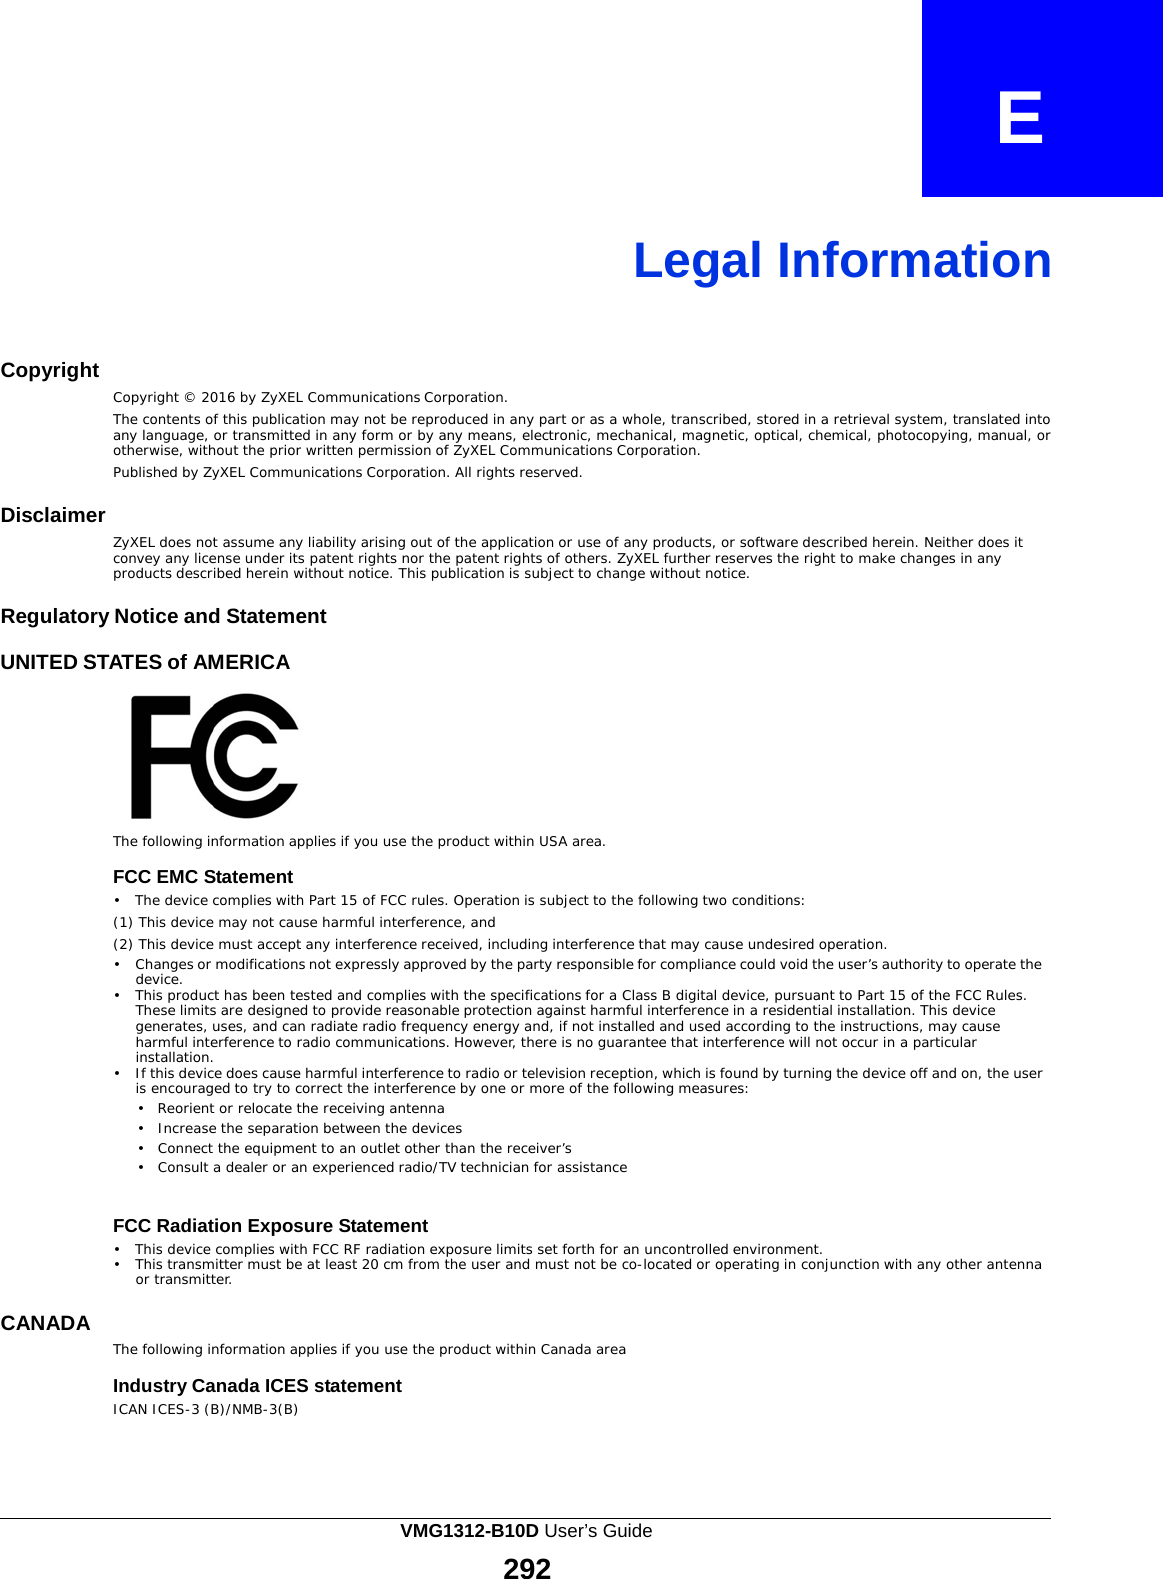  E    Legal Information    Copyright   Copyright © 2016 by ZyXEL Communications Corporation. The contents of this publication may not be reproduced in any part or as a whole, transcribed, stored in a retrieval system, translated into any language, or transmitted in any form or by any means, electronic, mechanical, magnetic, optical, chemical, photocopying, manual, or otherwise, without the prior written permission of ZyXEL Communications Corporation. Published by ZyXEL Communications Corporation. All rights reserved.  Disclaimer   ZyXEL does not assume any liability arising out of the application or use of any products, or software described herein. Neither does it convey any license under its patent rights nor the patent rights of others. ZyXEL further reserves the right to make changes in any products described herein without notice. This publication is subject to change without notice.  Regulatory Notice and Statement  UNITED STATES of AMERICA    The following information applies if you use the product within USA area.  FCC EMC Statement •   The device complies with Part 15 of FCC rules. Operation is subject to the following two conditions: (1) This device may not cause harmful interference, and (2) This device must accept any interference received, including interference that may cause undesired operation. •   Changes or modifications not expressly approved by the party responsible for compliance could void the user’s authority to operate the device. •   This product has been tested and complies with the specifications for a Class B digital device, pursuant to Part 15 of the FCC Rules. These limits are designed to provide reasonable protection against harmful interference in a residential installation. This device generates, uses, and can radiate radio frequency energy and, if not installed and used according to the instructions, may cause harmful interference to radio communications. However, there is no guarantee that interference will not occur in a particular installation. •   If this device does cause harmful interference to radio or television reception, which is found by turning the device off and on, the user is encouraged to try to correct the interference by one or more of the following measures: •   Reorient or relocate the receiving antenna •   Increase the separation between the devices •   Connect the equipment to an outlet other than the receiver’s •   Consult a dealer or an experienced radio/TV technician for assistance   FCC Radiation Exposure Statement •   This device complies with FCC RF radiation exposure limits set forth for an uncontrolled environment. •   This transmitter must be at least 20 cm from the user and must not be co-located or operating in conjunction with any other antenna or transmitter.  CANADA   The following information applies if you use the product within Canada area  Industry Canada ICES statement ICAN ICES-3 (B)/NMB-3(B) VMG1312-B10D User’s Guide 292  